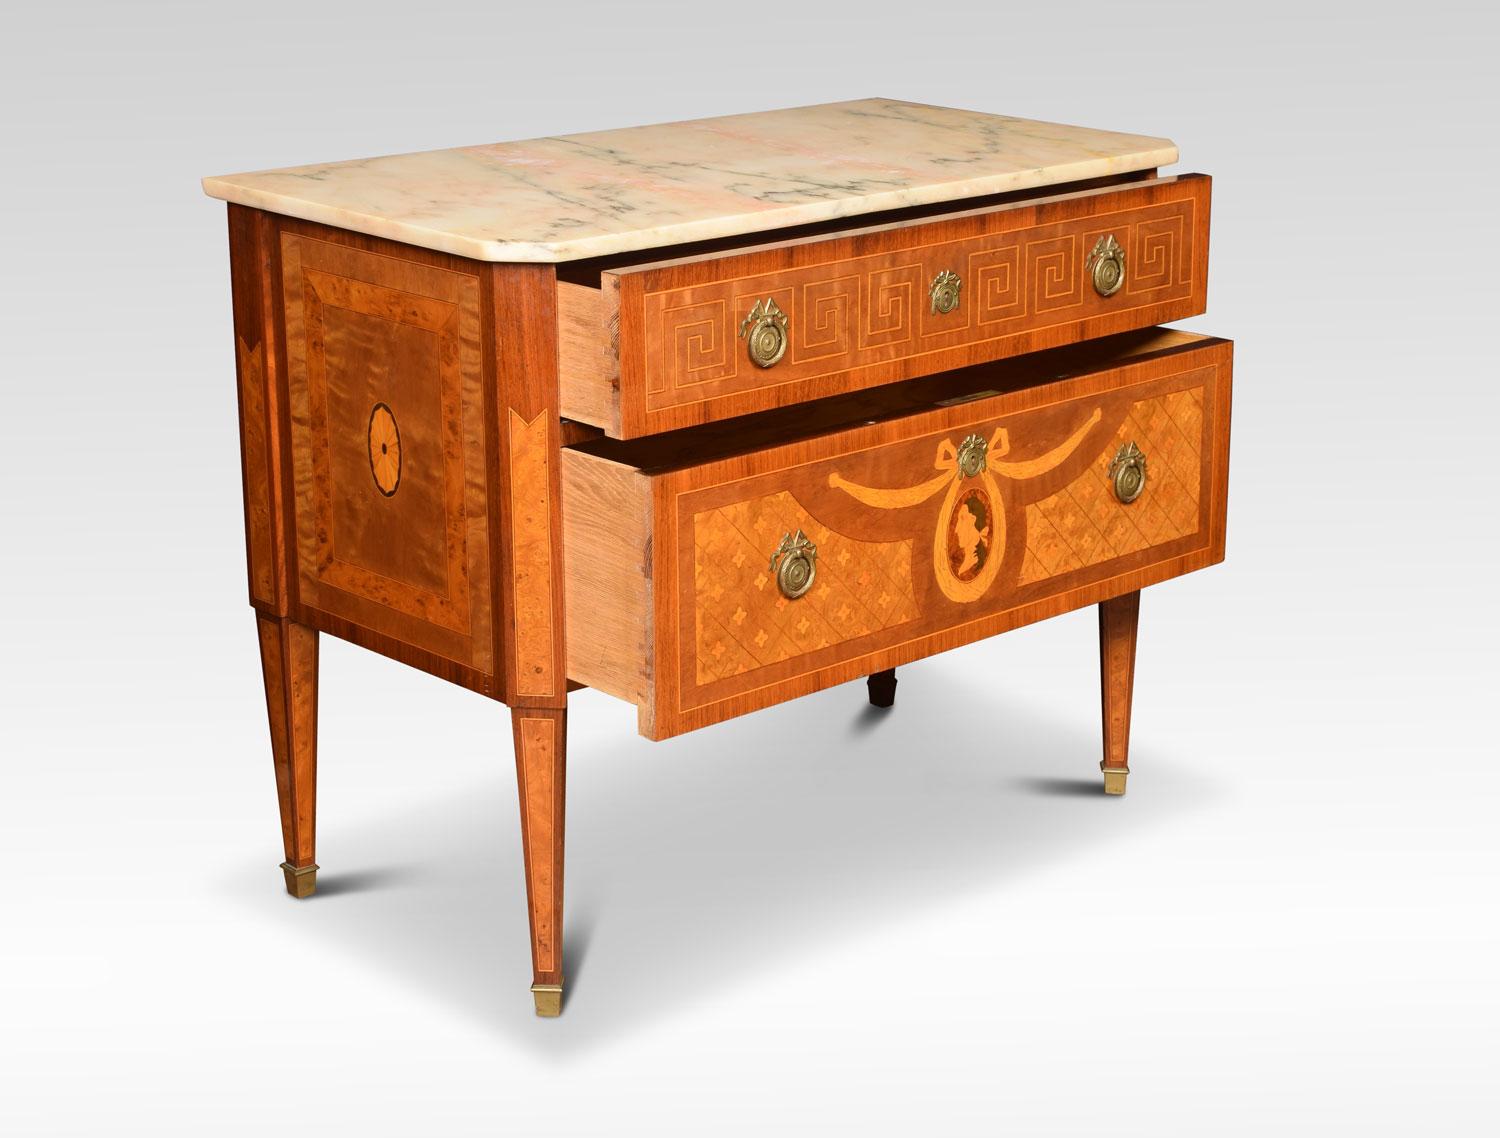 French marble top and marquetry commode, the veined marble top with canted front angles, over two graduated drawers, The top drawer with Greek key inlay, the lower drawer having a marquetry portrait medallion suspended from swags. Flanked by lattice